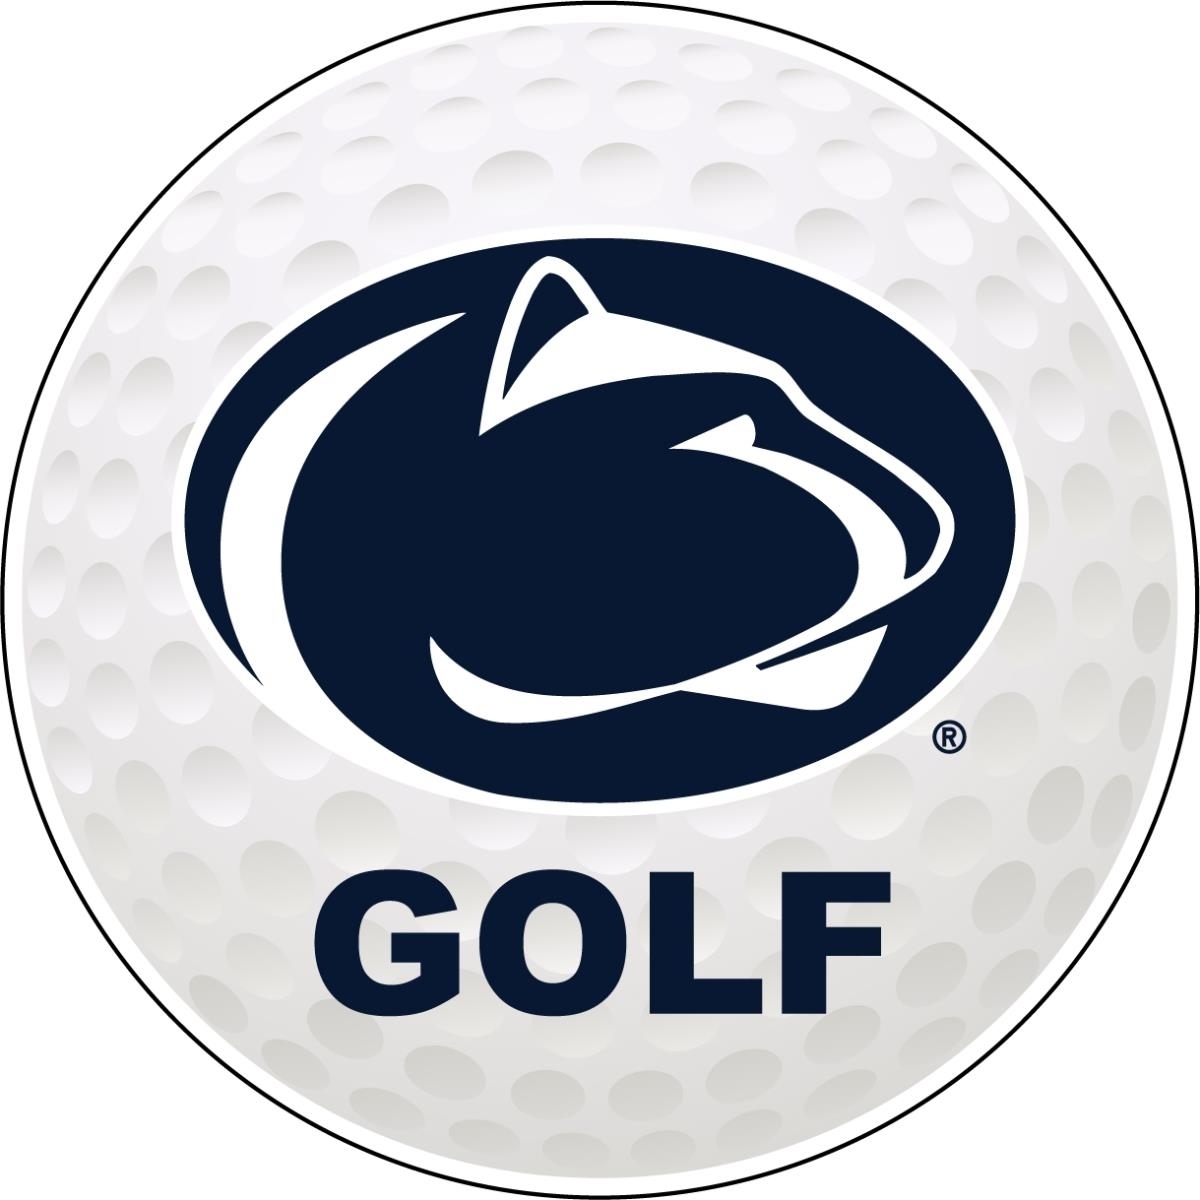 Penn State Nittany Lions 4-Inch Round Golf Ball Vinyl Decal Sticker